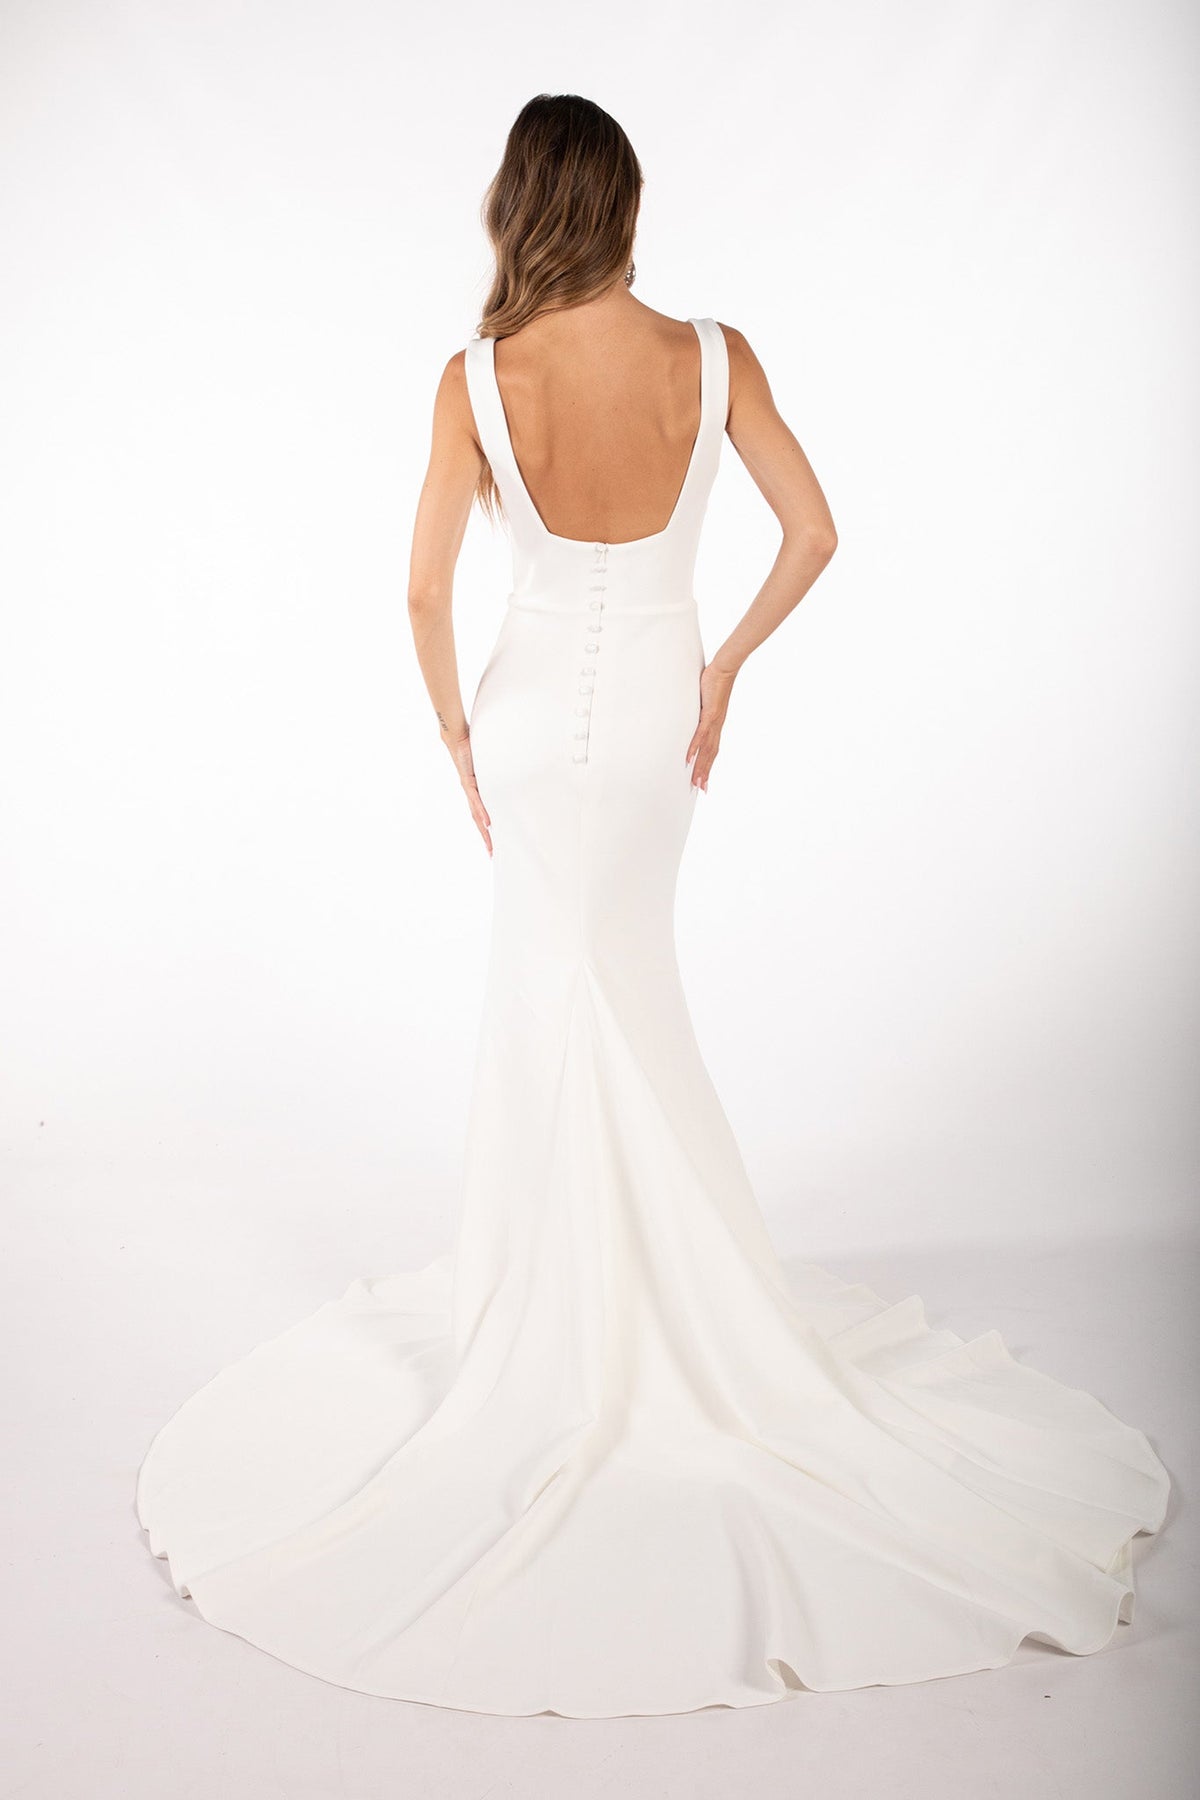 Open Back and Sweep Train Design of Ivory White Square Neck Fitted Wedding Gown